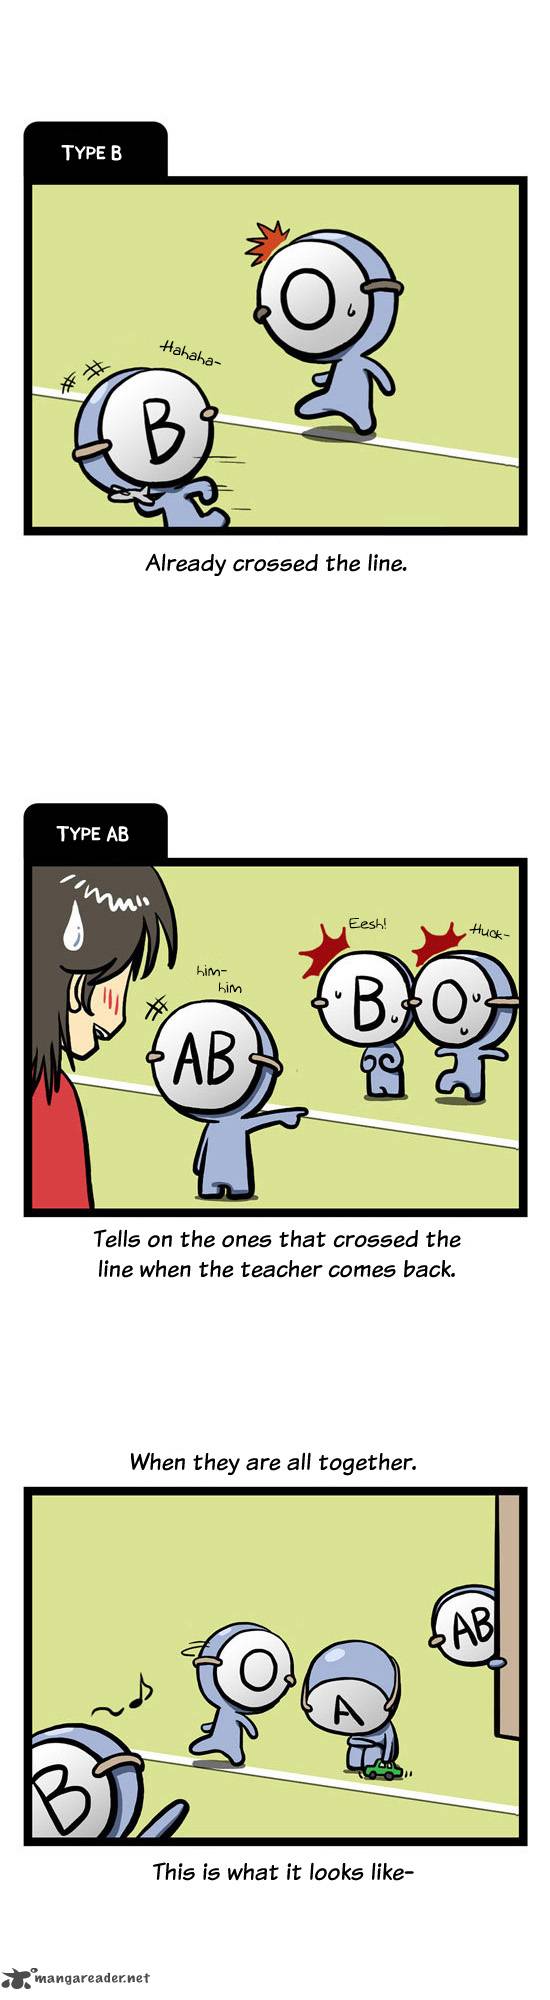 A Simple Thinking About Blood Types 3 3